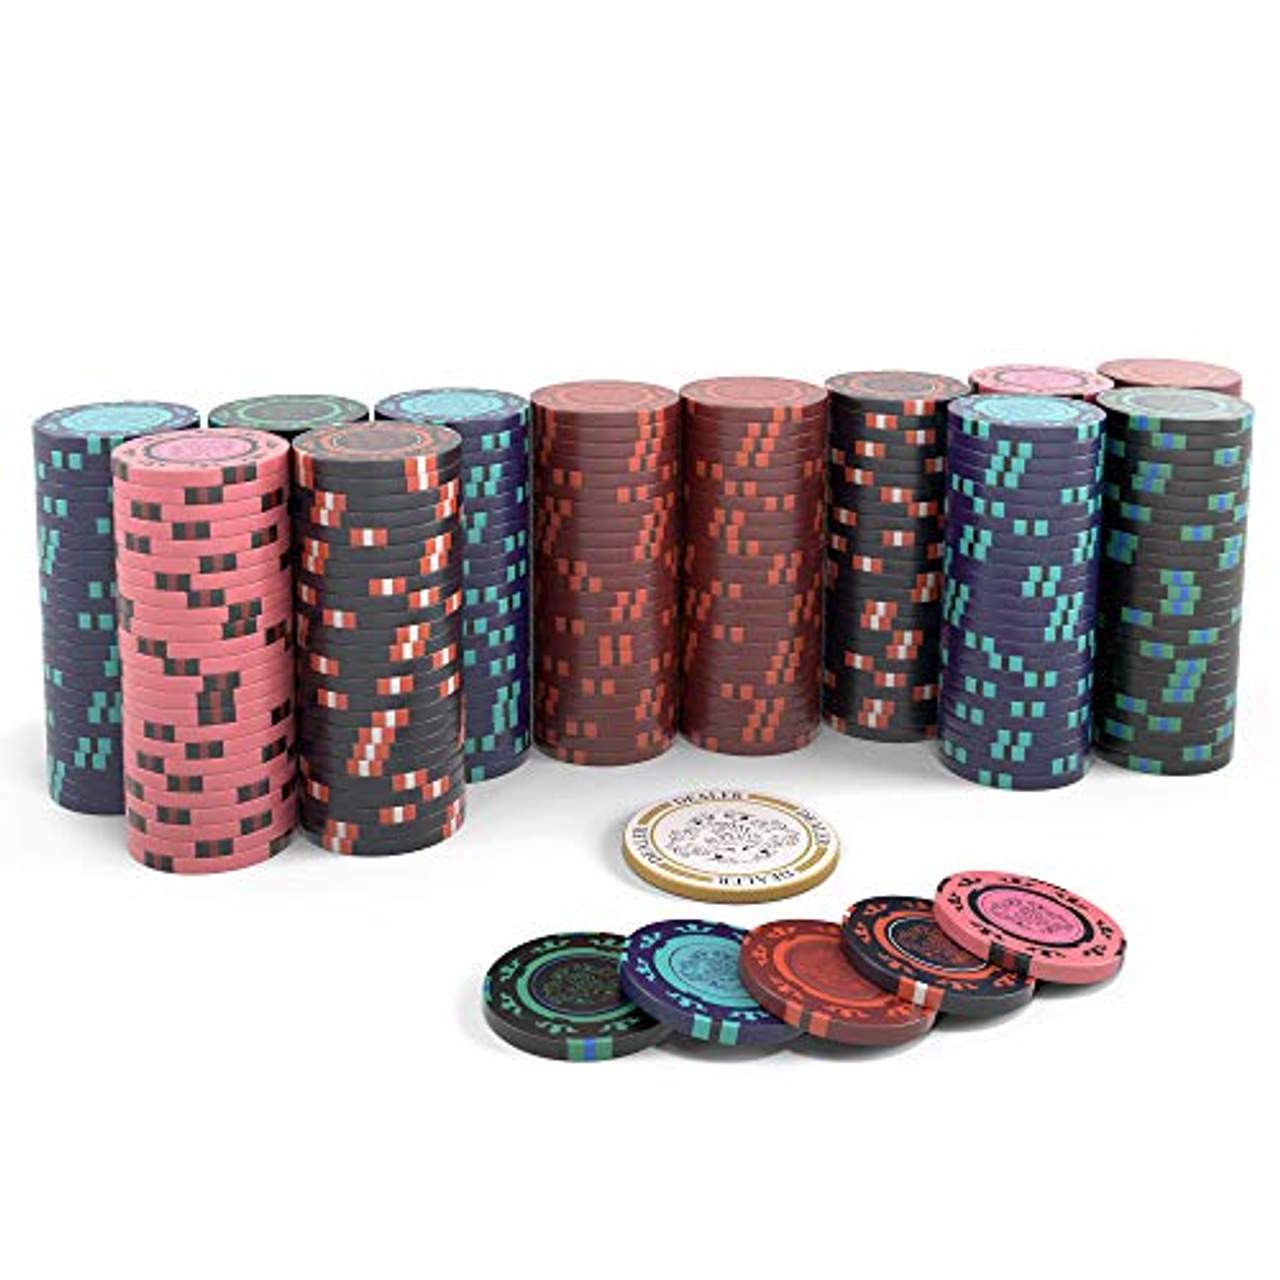 Bullets Playing Cards Pokerkoffer Corrado Deluxe Pokerset